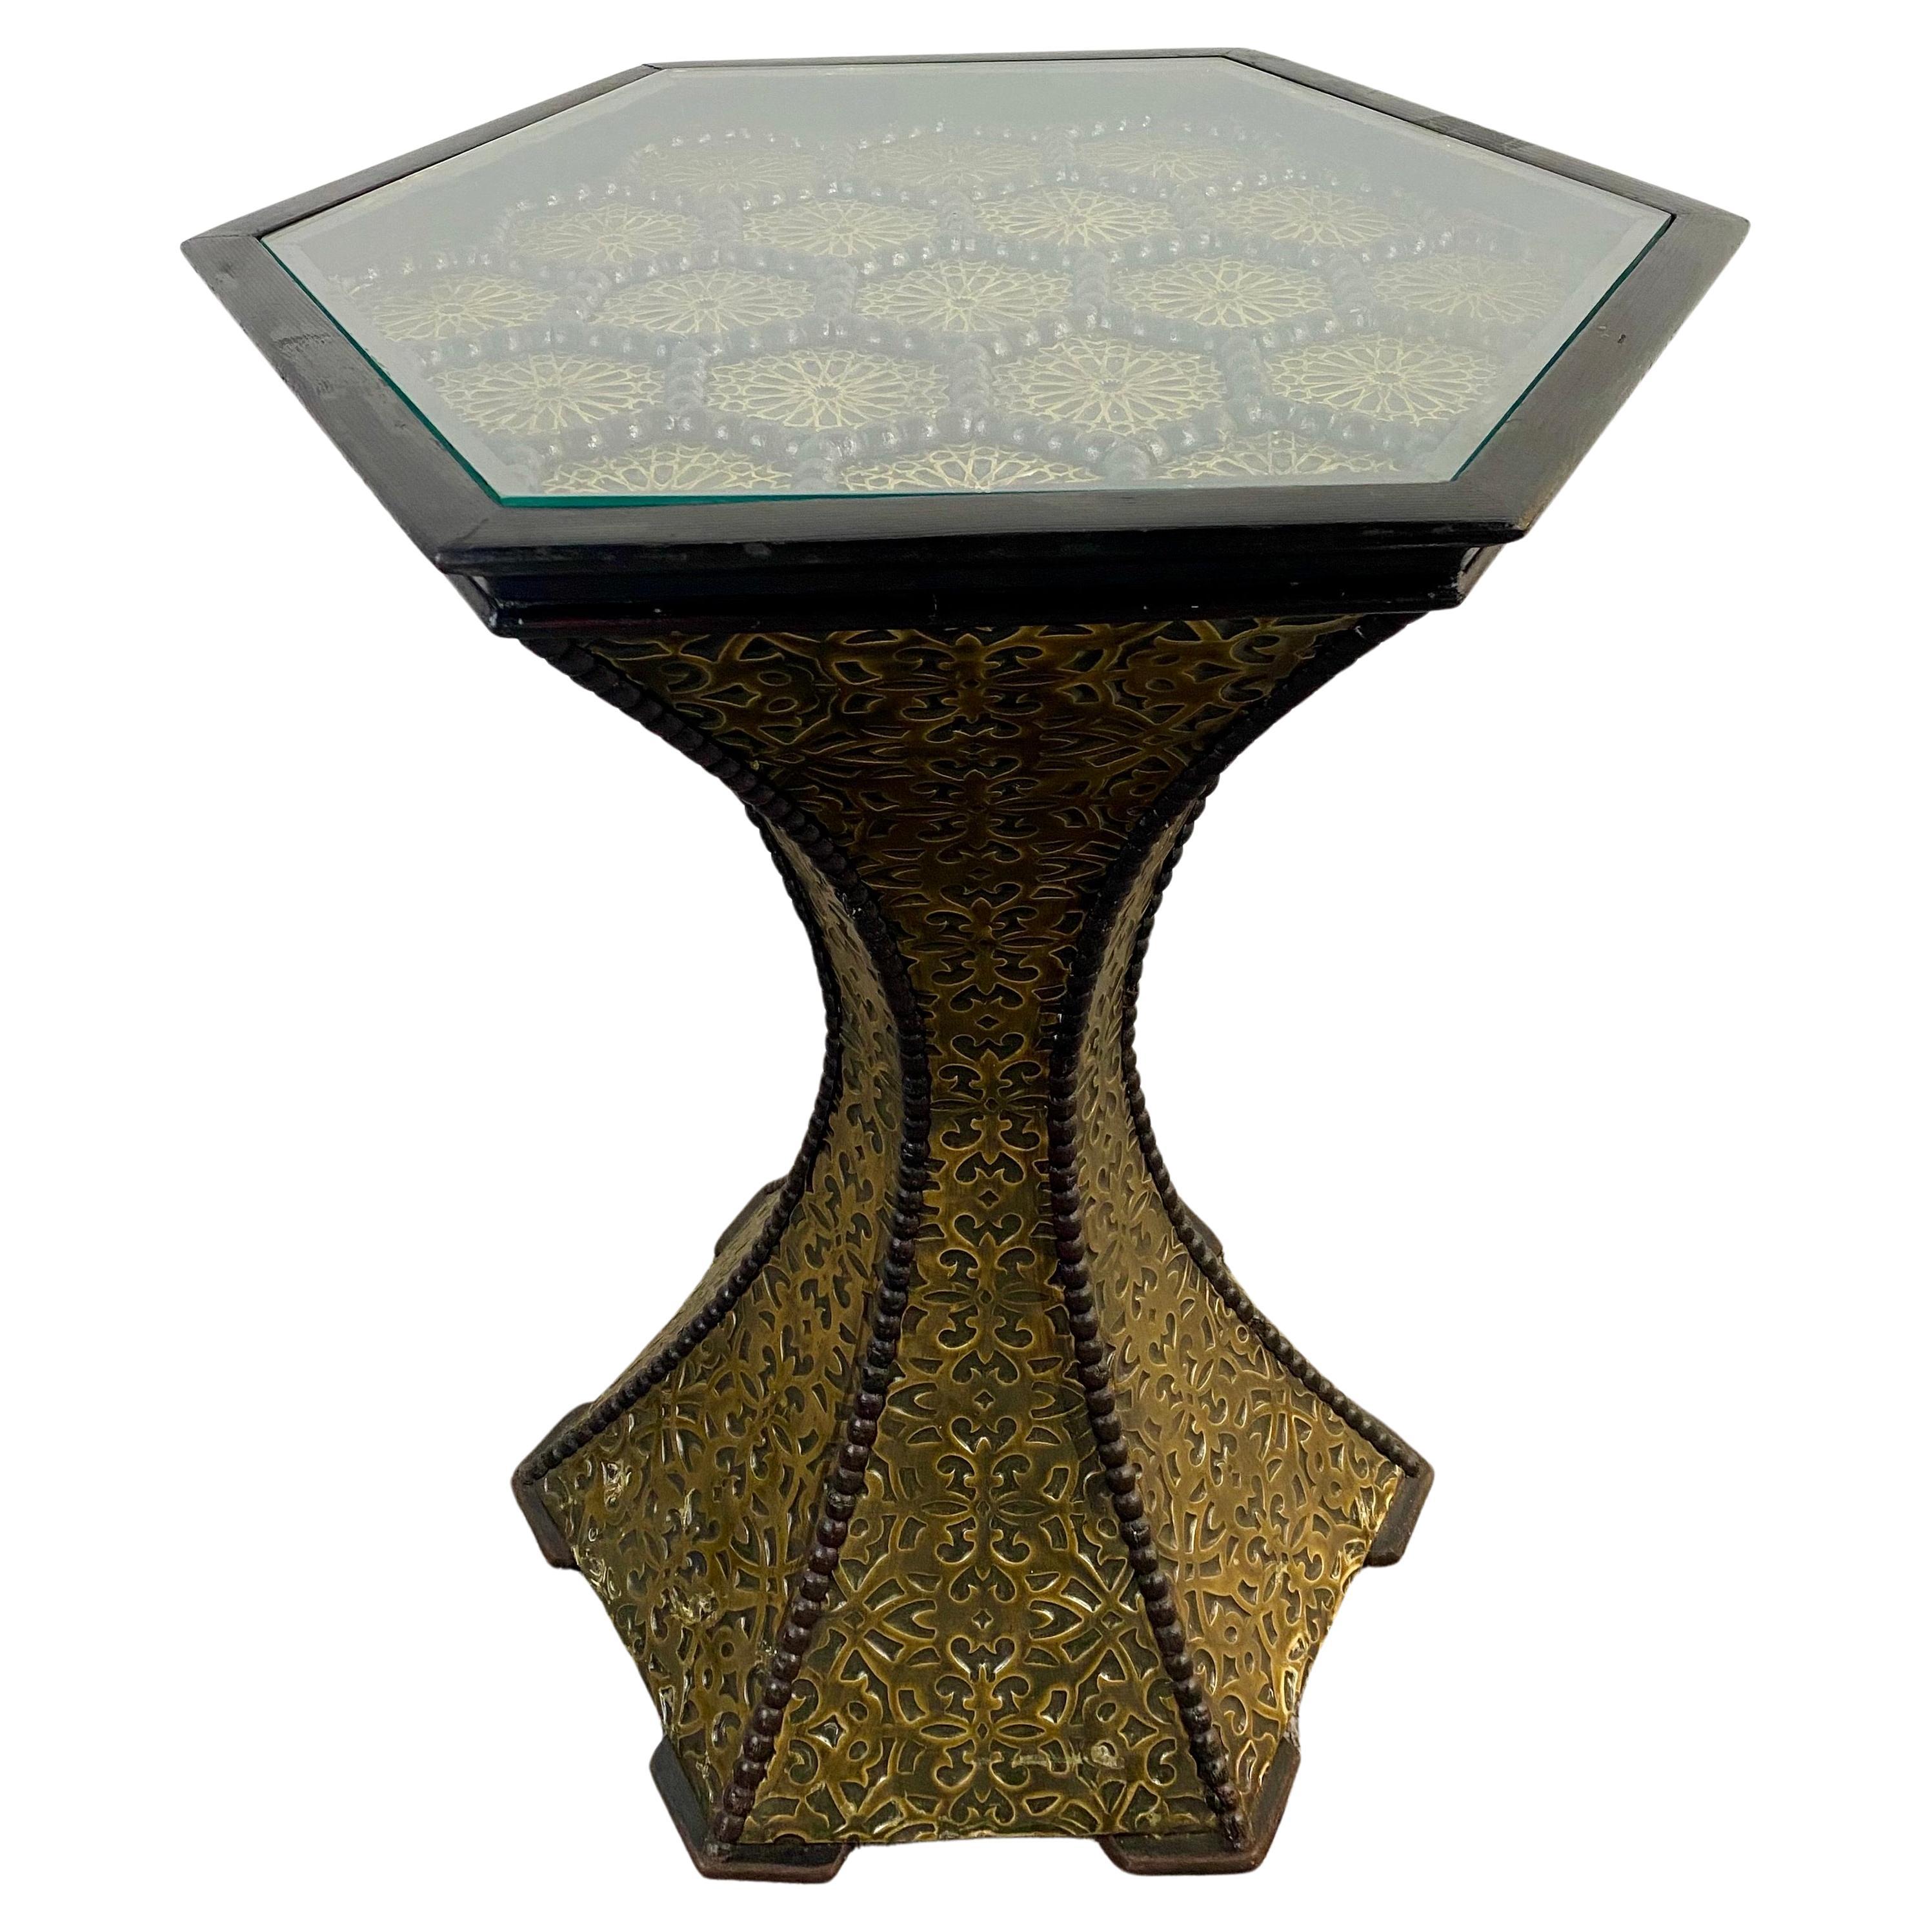 A majestic pair of Hollywood Regency style end or side tables in black ornate with exceptionally crafted antique brass. The pedestal shaped end tables are handcrafted of beechwood and high quality brass. This pair will make a lasting impression in